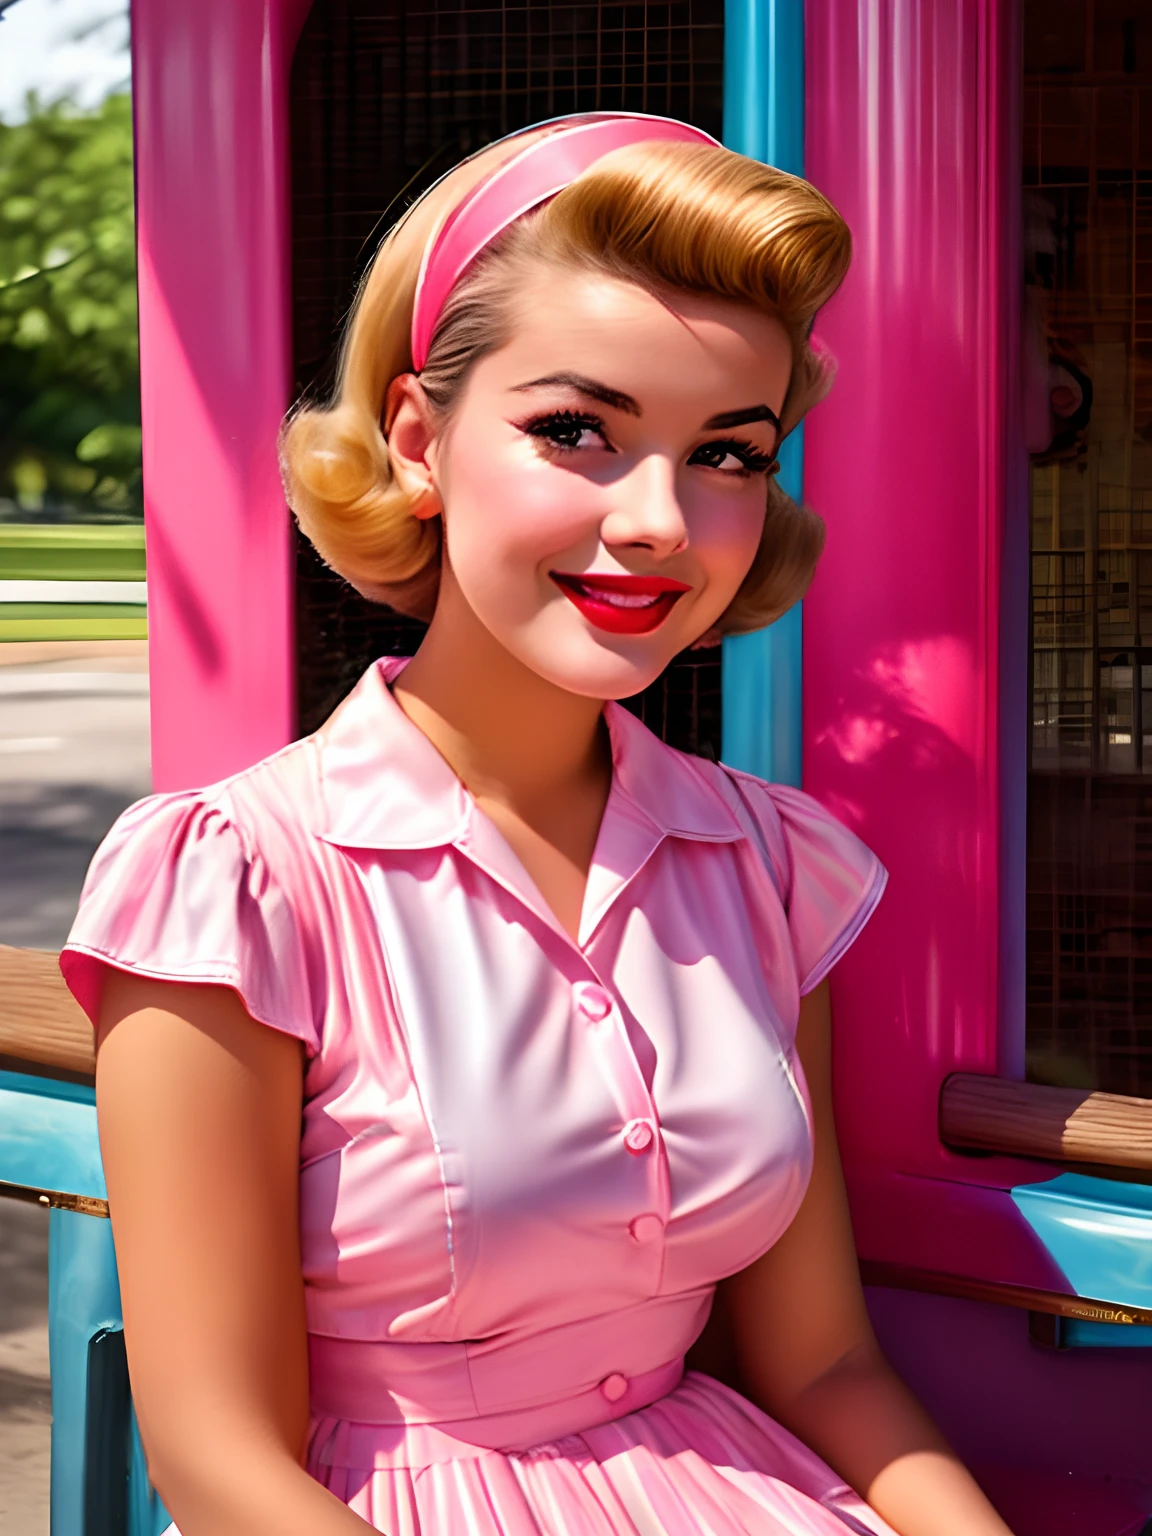 Alafed woman in pink and blue dress sitting on bench, 5 0 s style, 50s style, retro 5 0 s style, retro pinup model, 1 9 5 0 s style, sixties pinup, Vintage color photo, cute young woman, Vintage Color 1 9 5 0 S, girl pinup, 1950s vibes